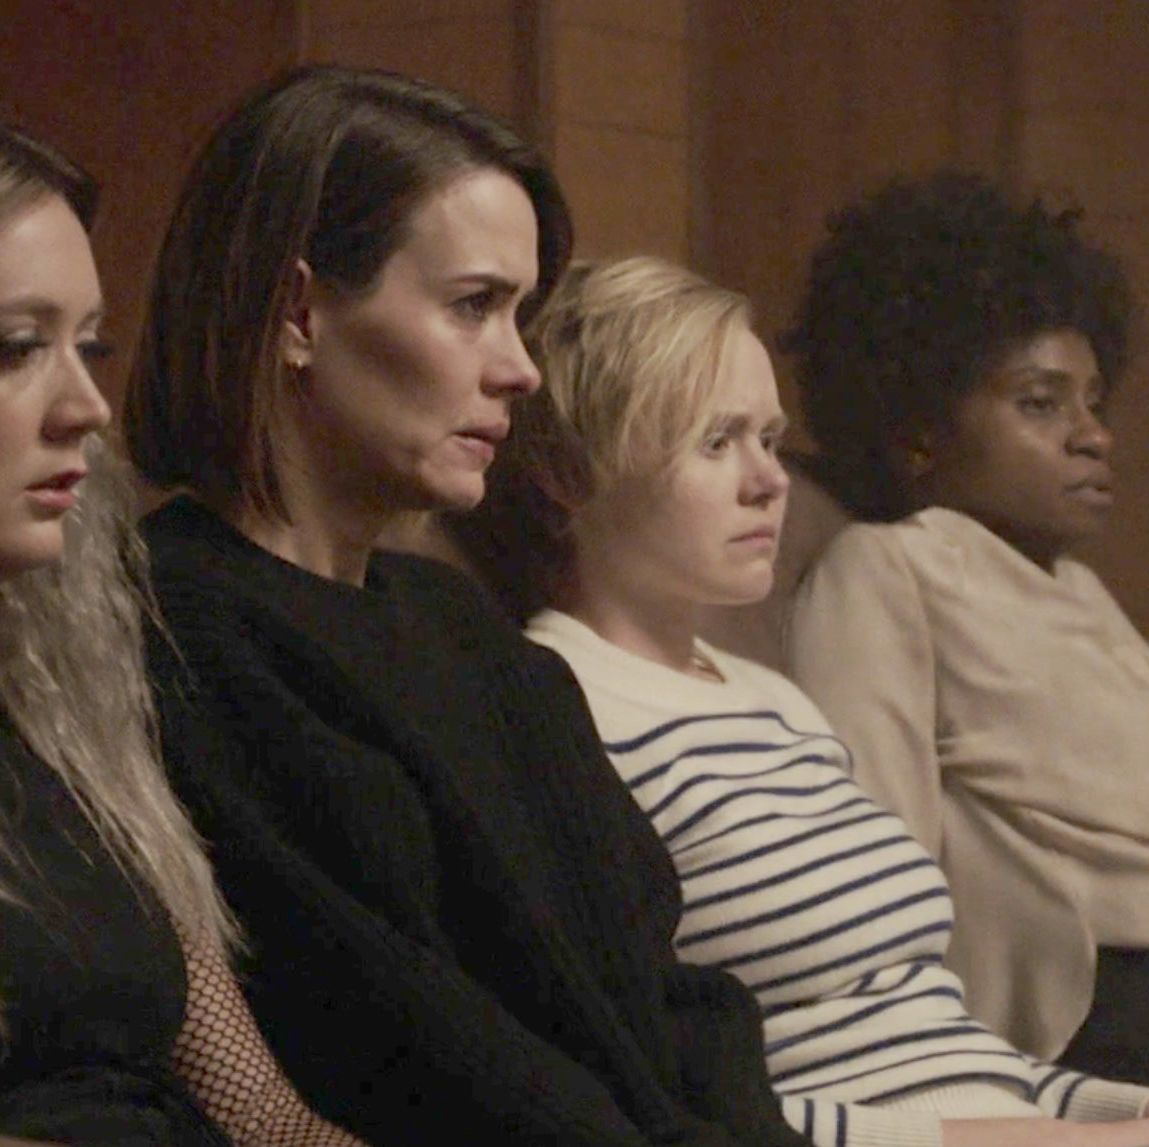 Winter (Billie Lourd), Ally (Sarah Paulson), Ivy (Alison Pill), and Beverly (Adina Porter) in American Horror Story: Cult, "Drink the Kool-Aid," Season 7, Episode 9.​​​​​​​